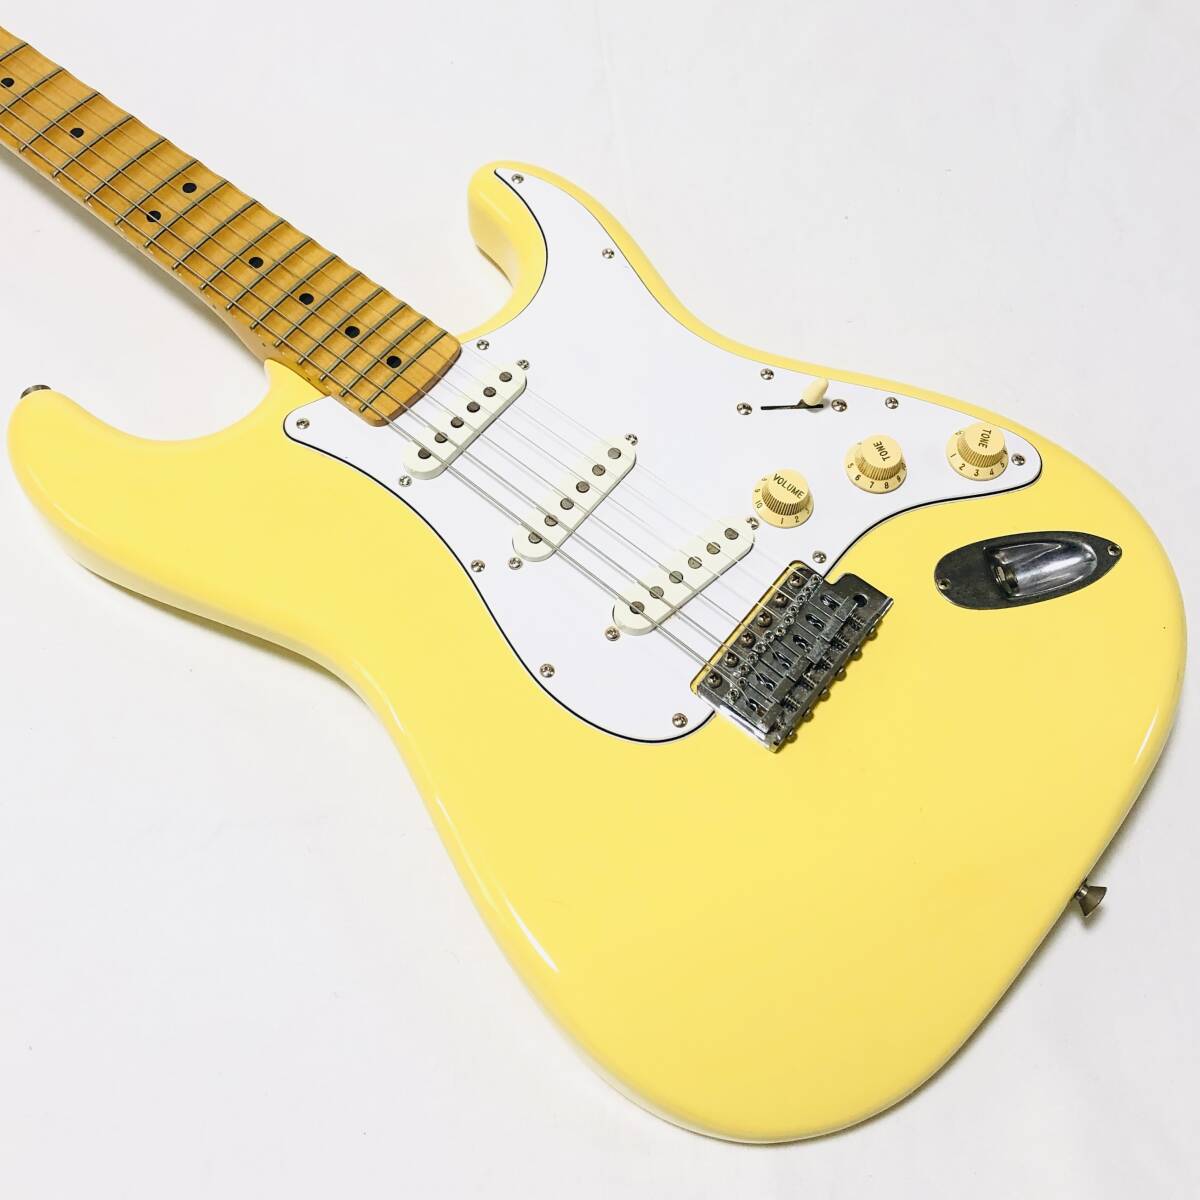 Fender Stratocaster ST72-SC Crafted in Japan フェンダー ストラトキャスター スキャロップモデル Yngwie Malmsteenの画像4